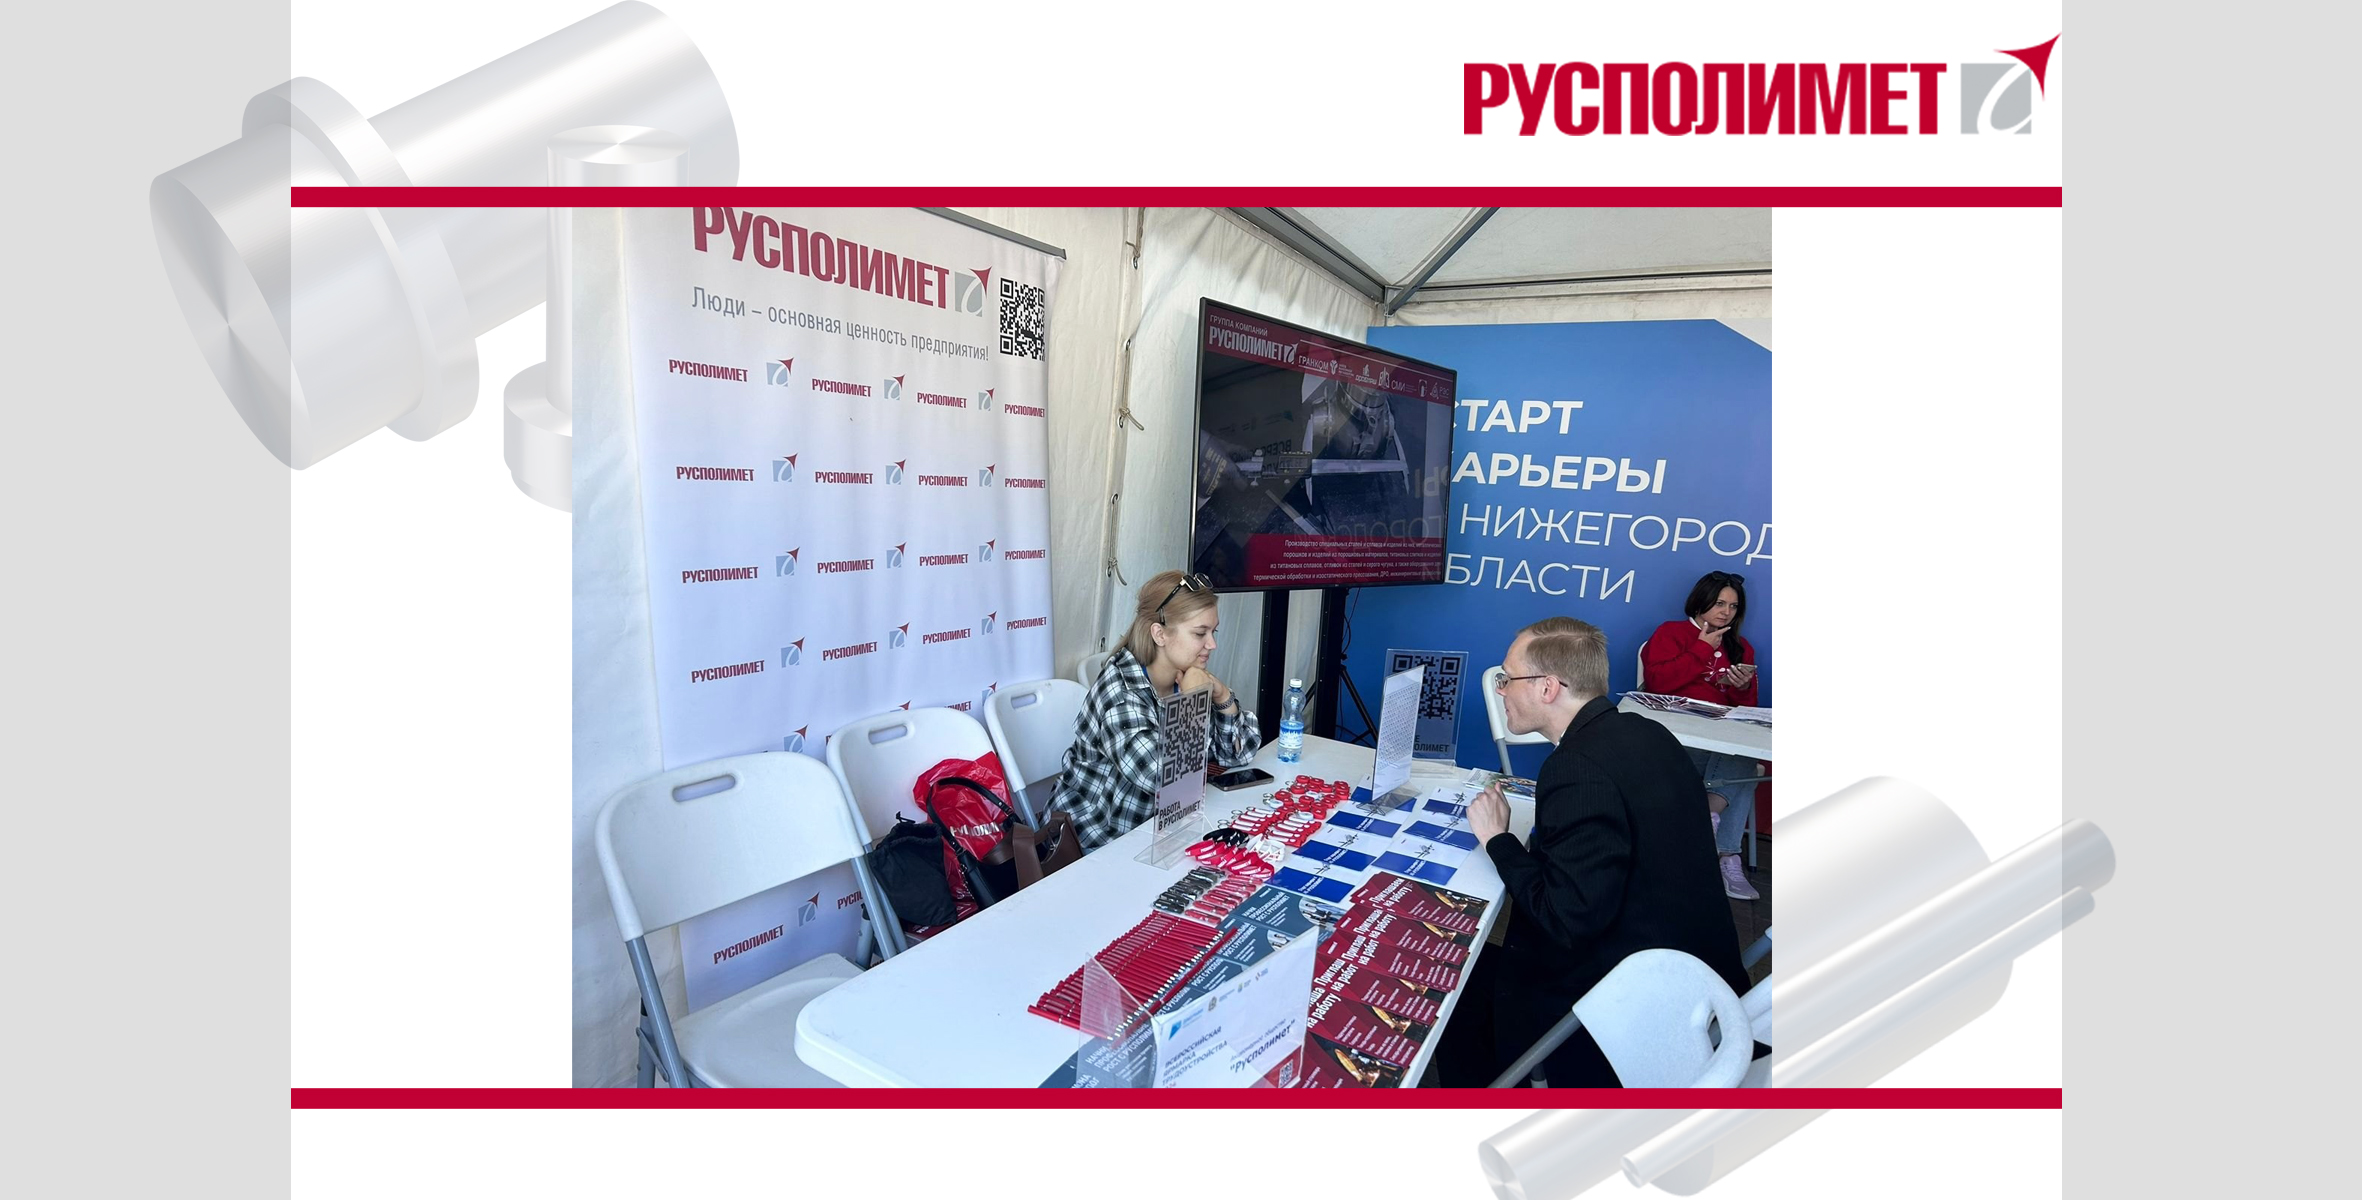 RUSPOLIMET TOOK PART IN THE ALL-RUSSIAN EMPLOYMENT FAIR "JOBS OF RUSSIA. A TIME OF OPPORTUNITY"